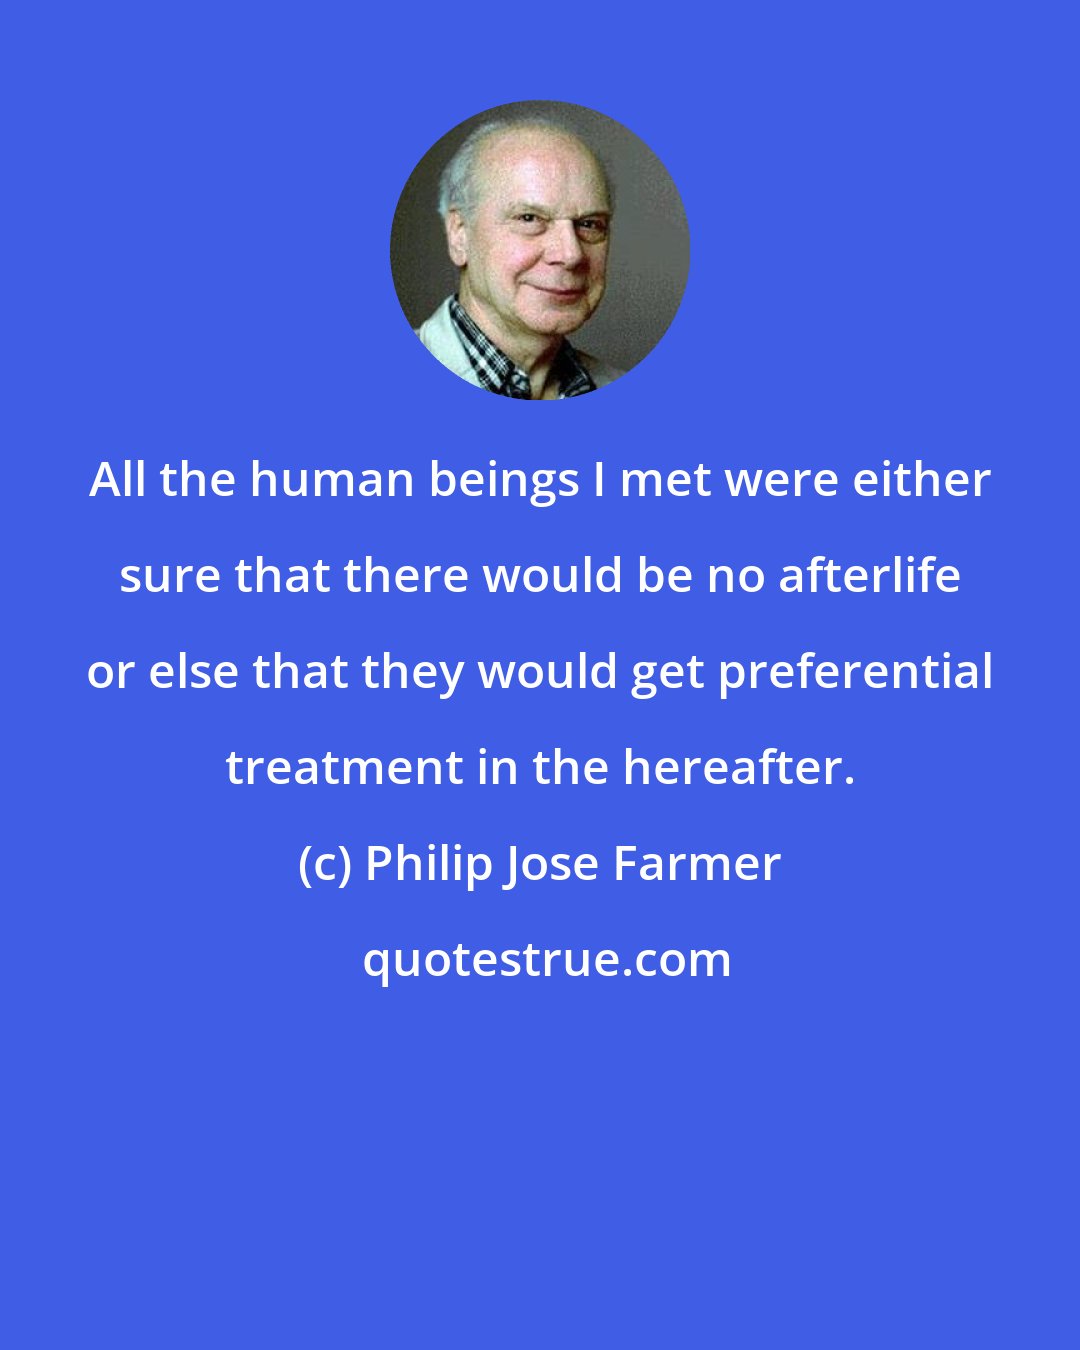 Philip Jose Farmer: All the human beings I met were either sure that there would be no afterlife or else that they would get preferential treatment in the hereafter.